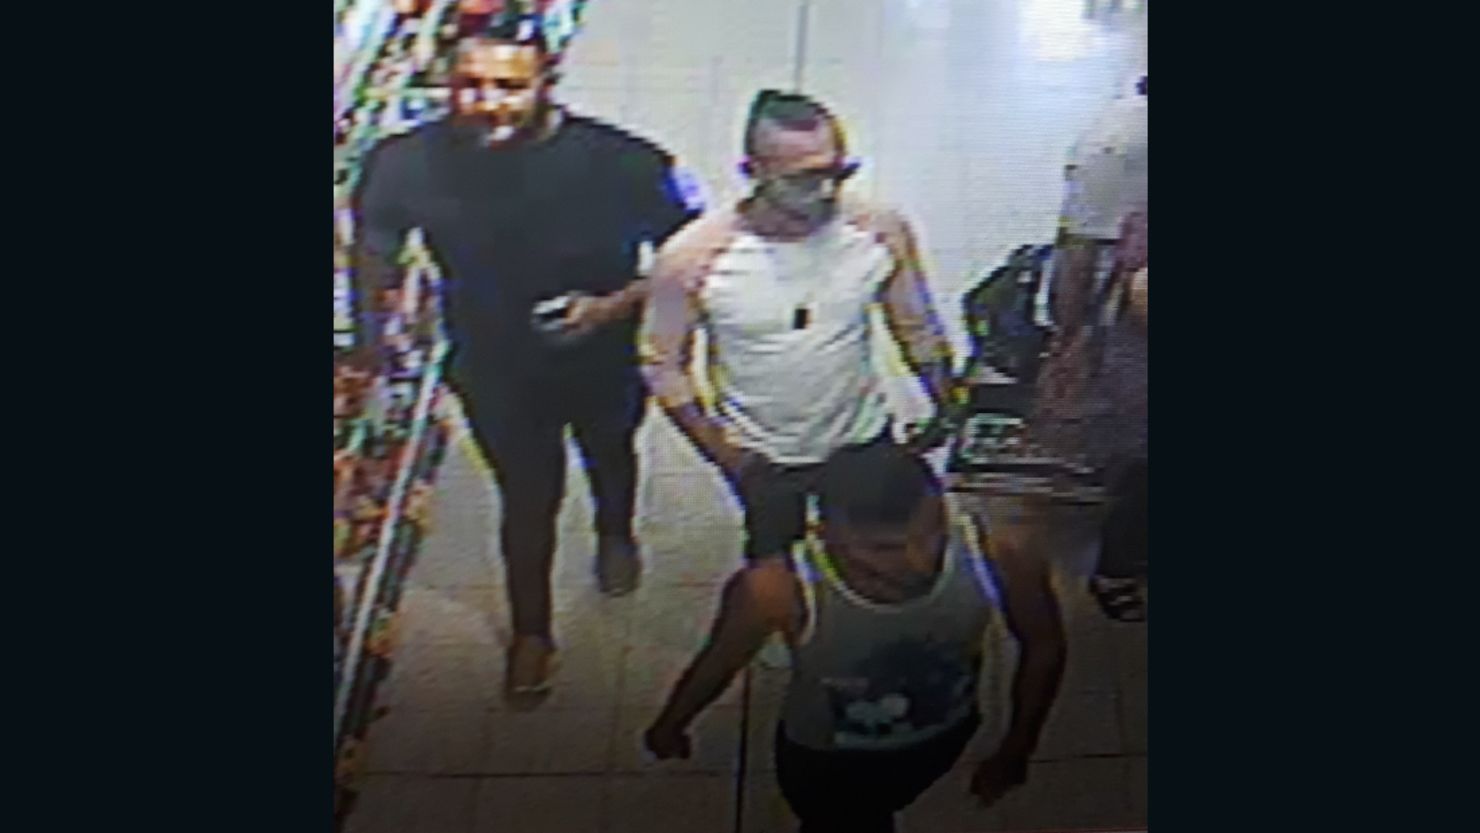 Police have released a photo of three men they want to speak to after a three-year-old boy was seriously injured in a suspected acid attack in a Worcester shop on July 21. 